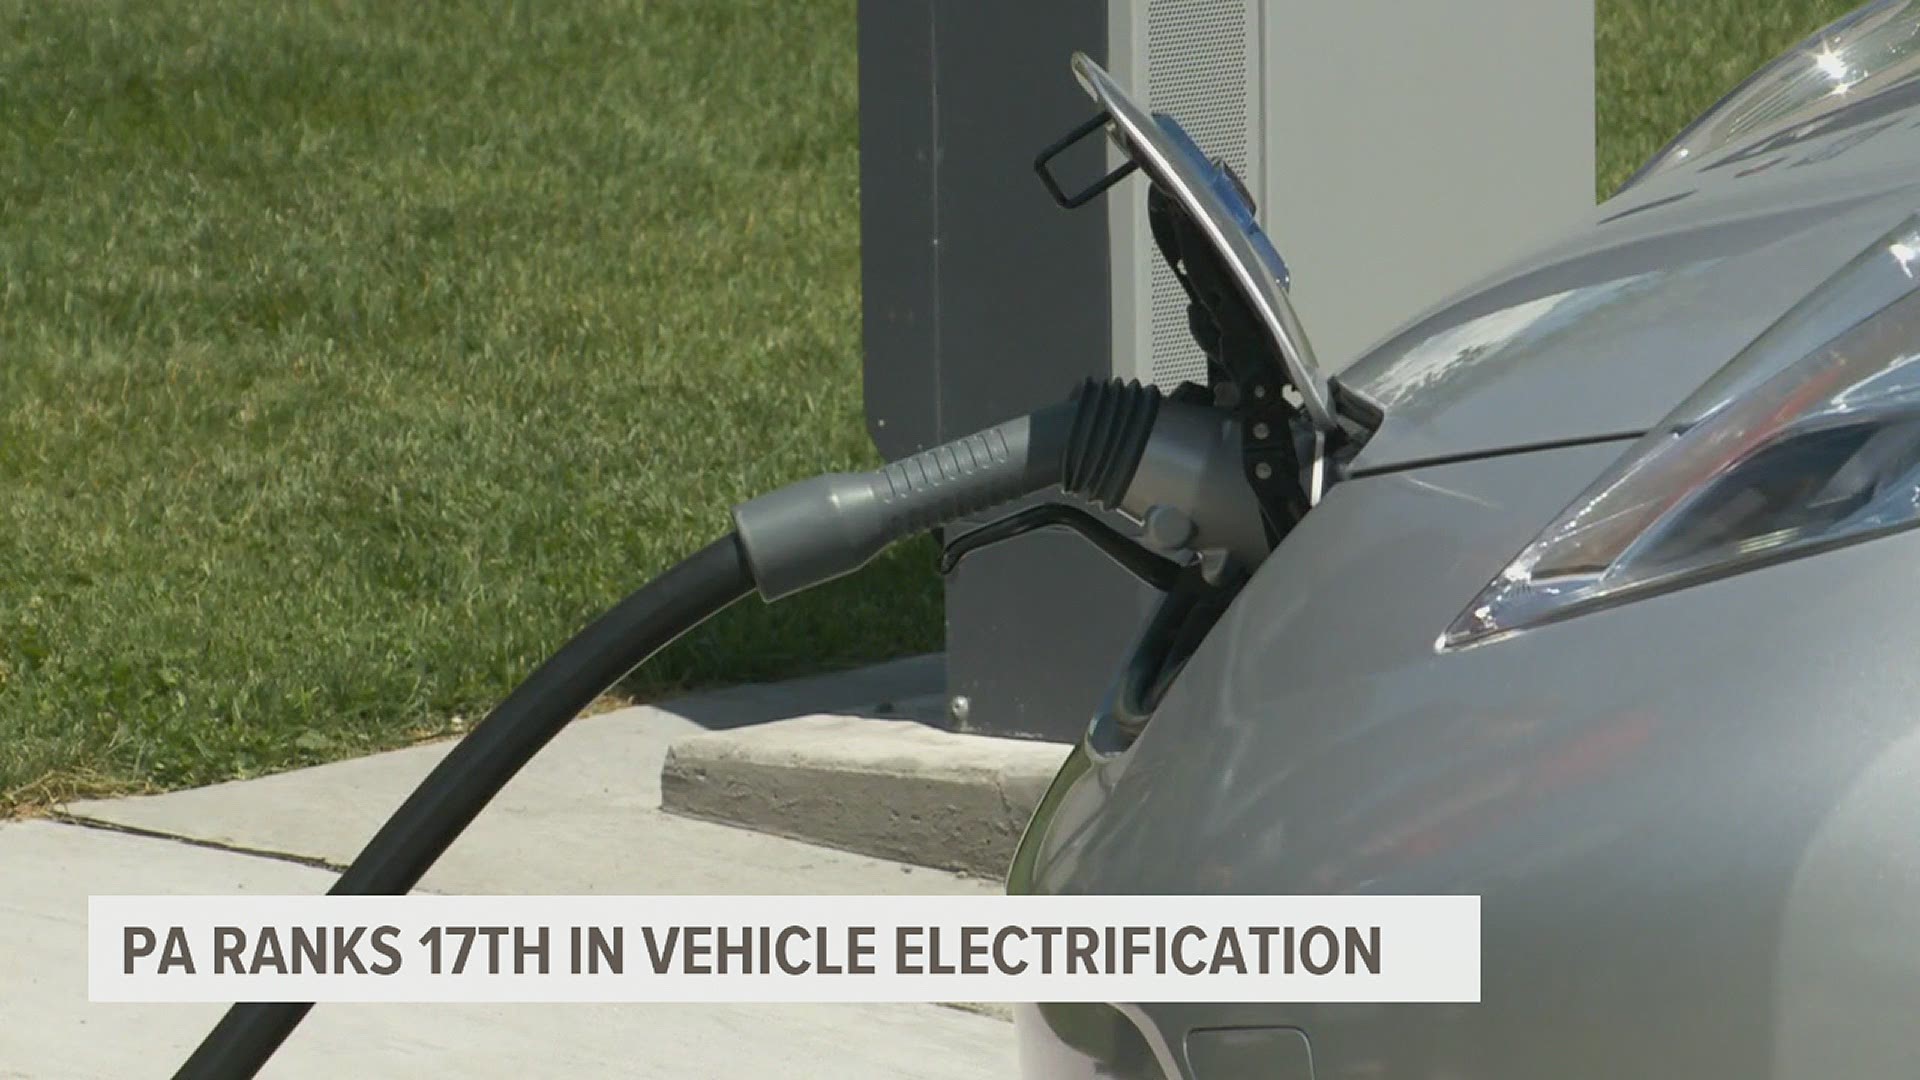 As electric vehicles become more advanced, a new study says Pennsylvania ranks 17th among states that are taking steps to support the shift to electric.